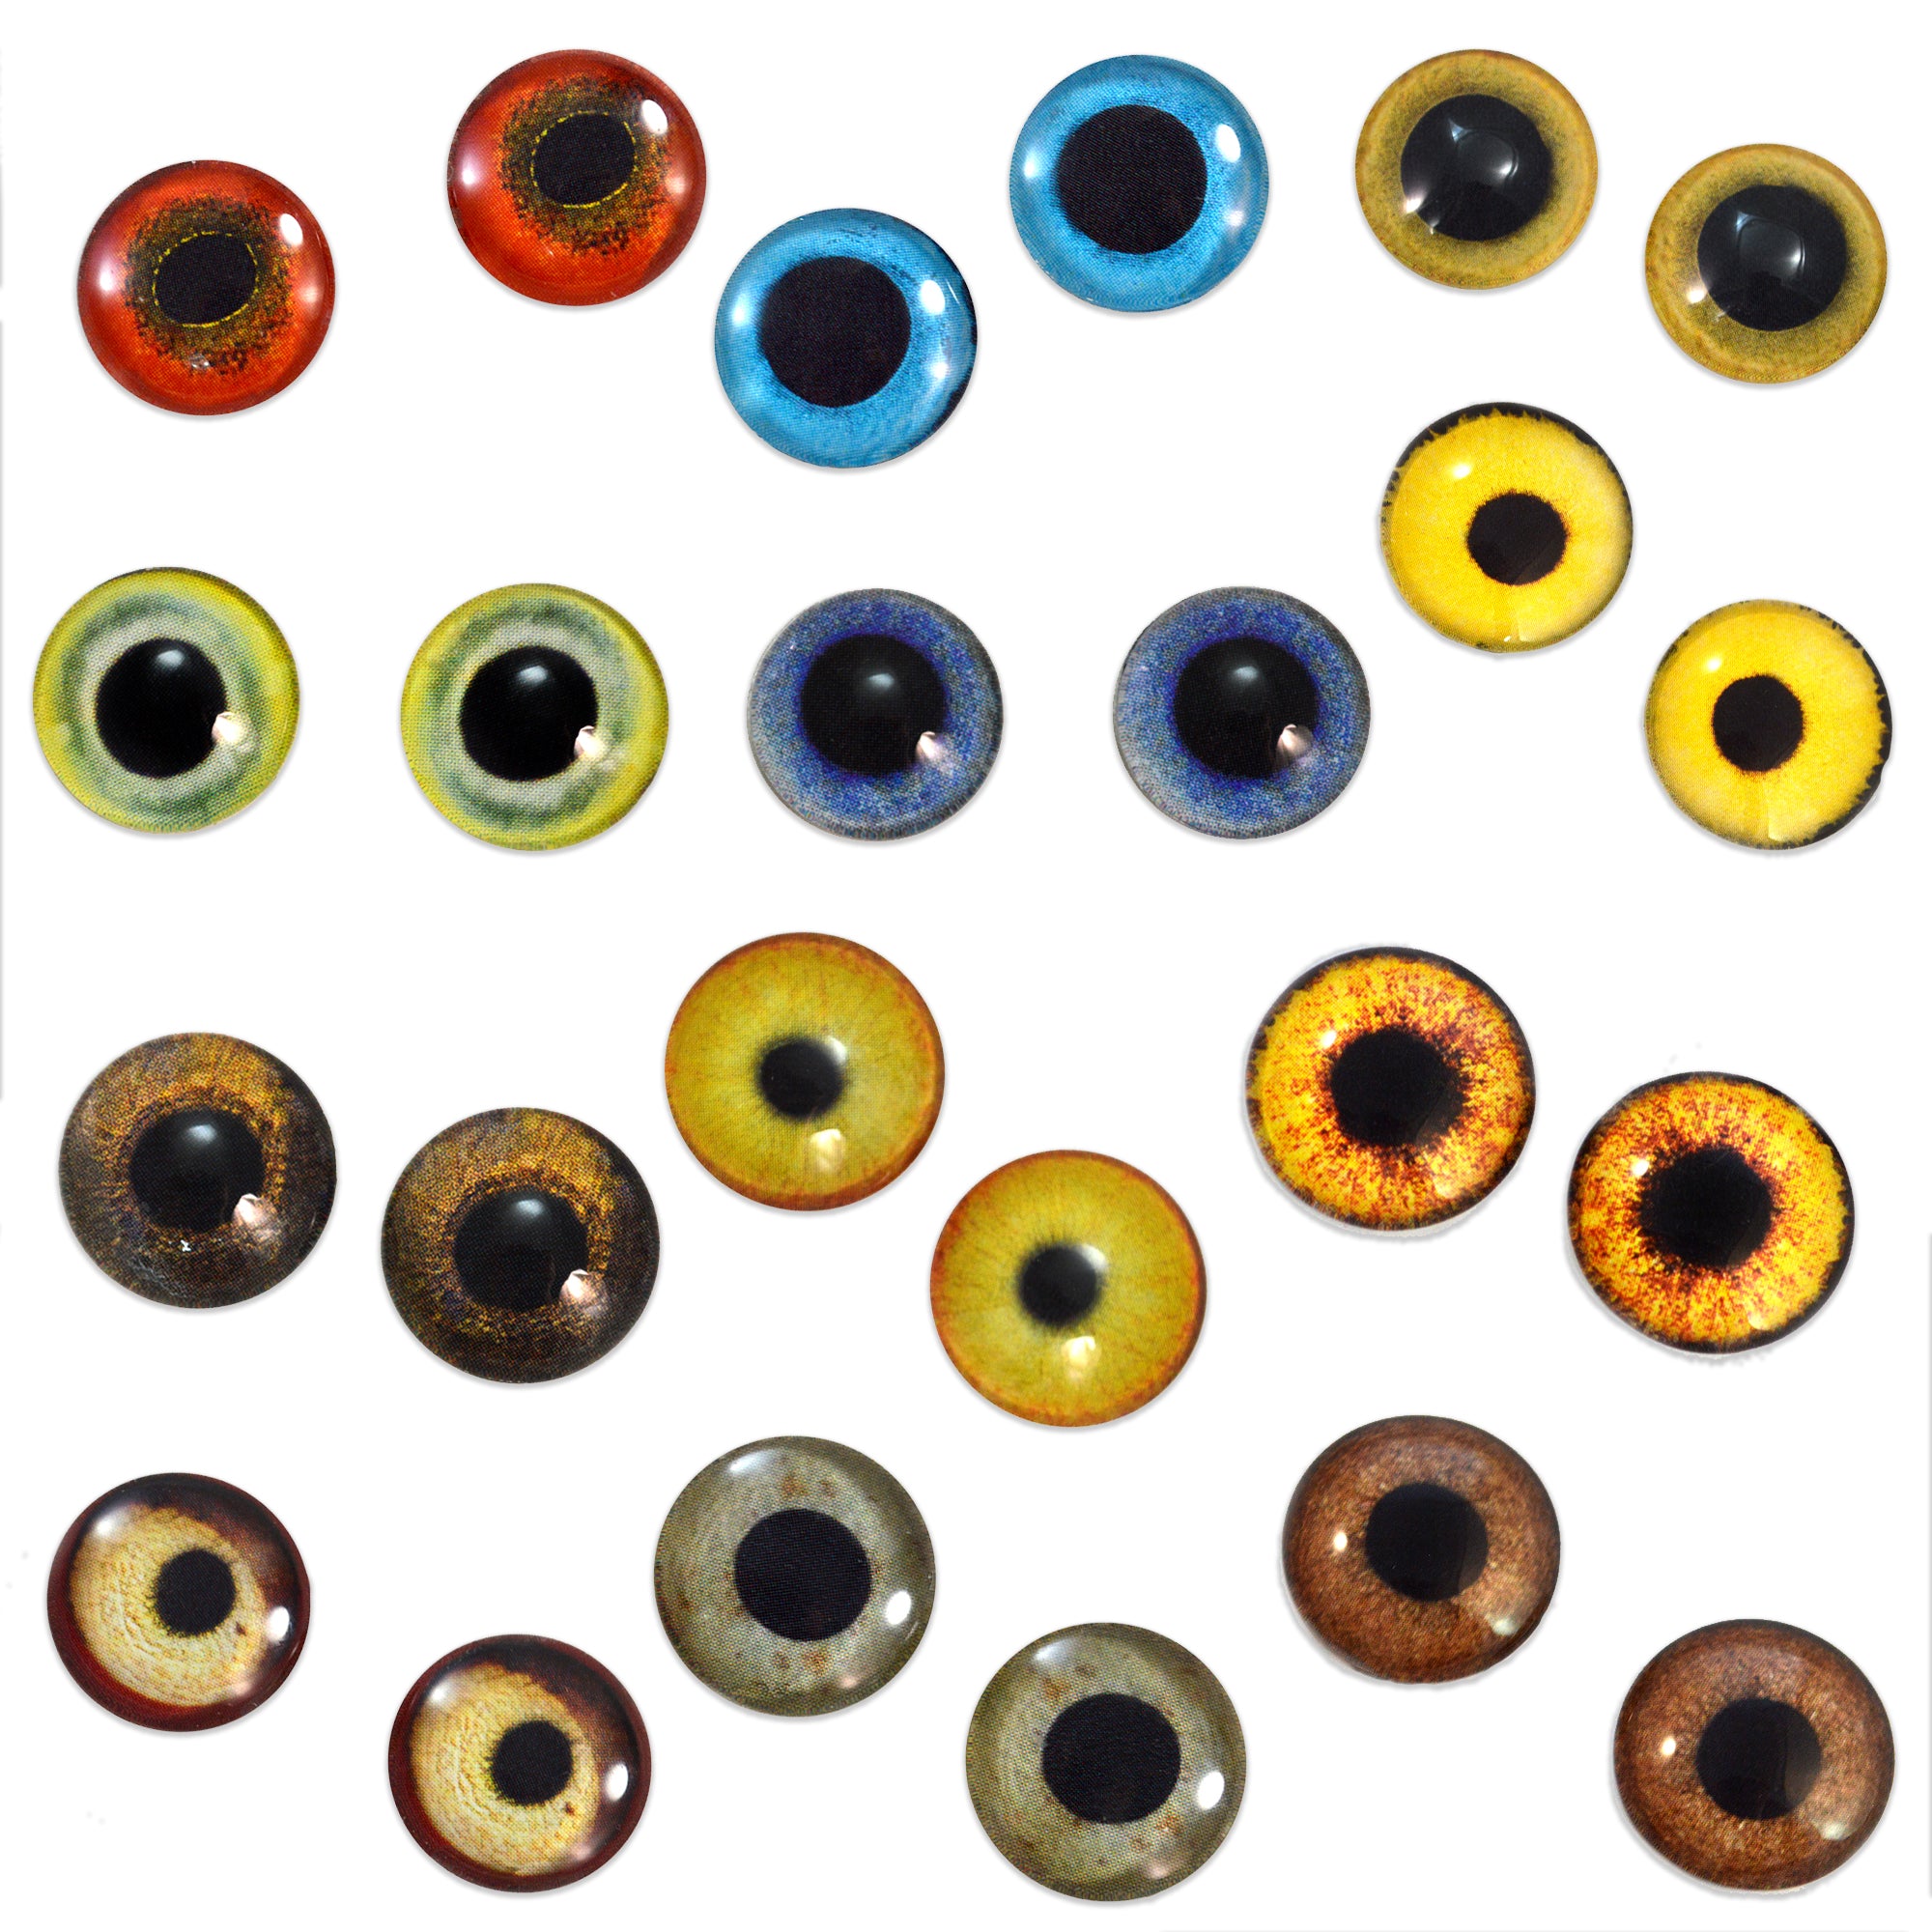 Safety Eyes Gold 10mm per pair